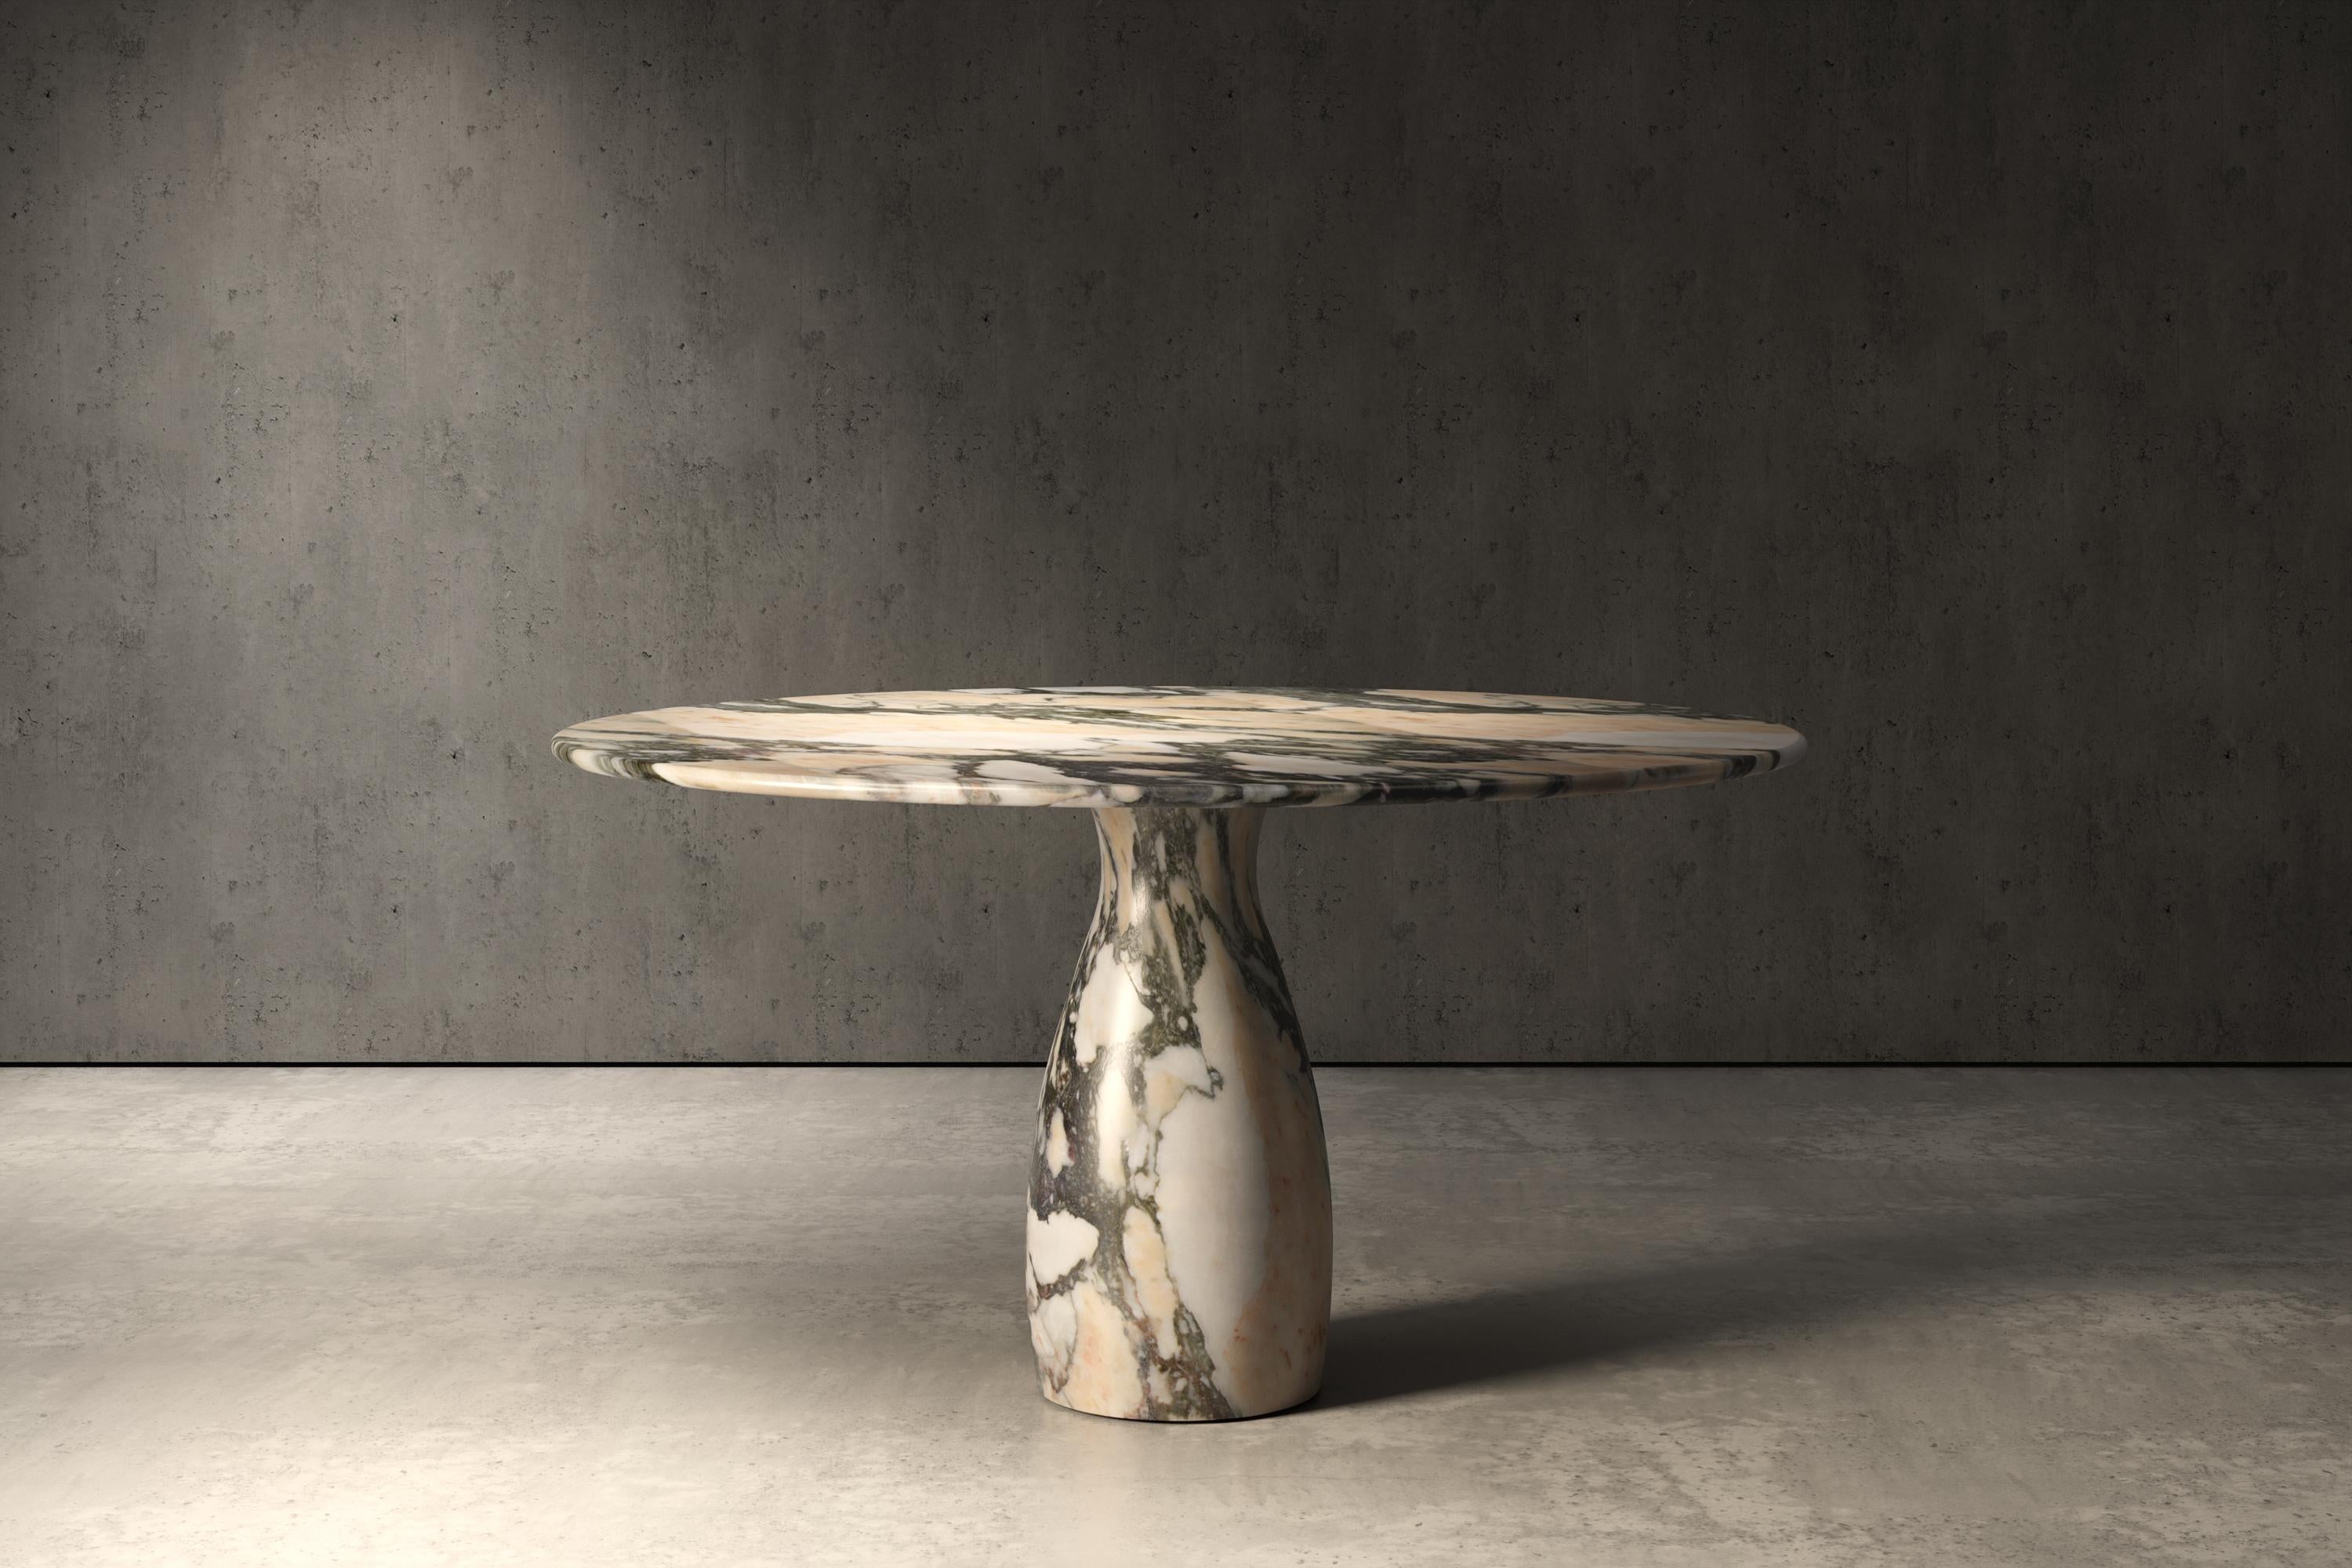 Carved table made of marble by Italian craftsmen. The 